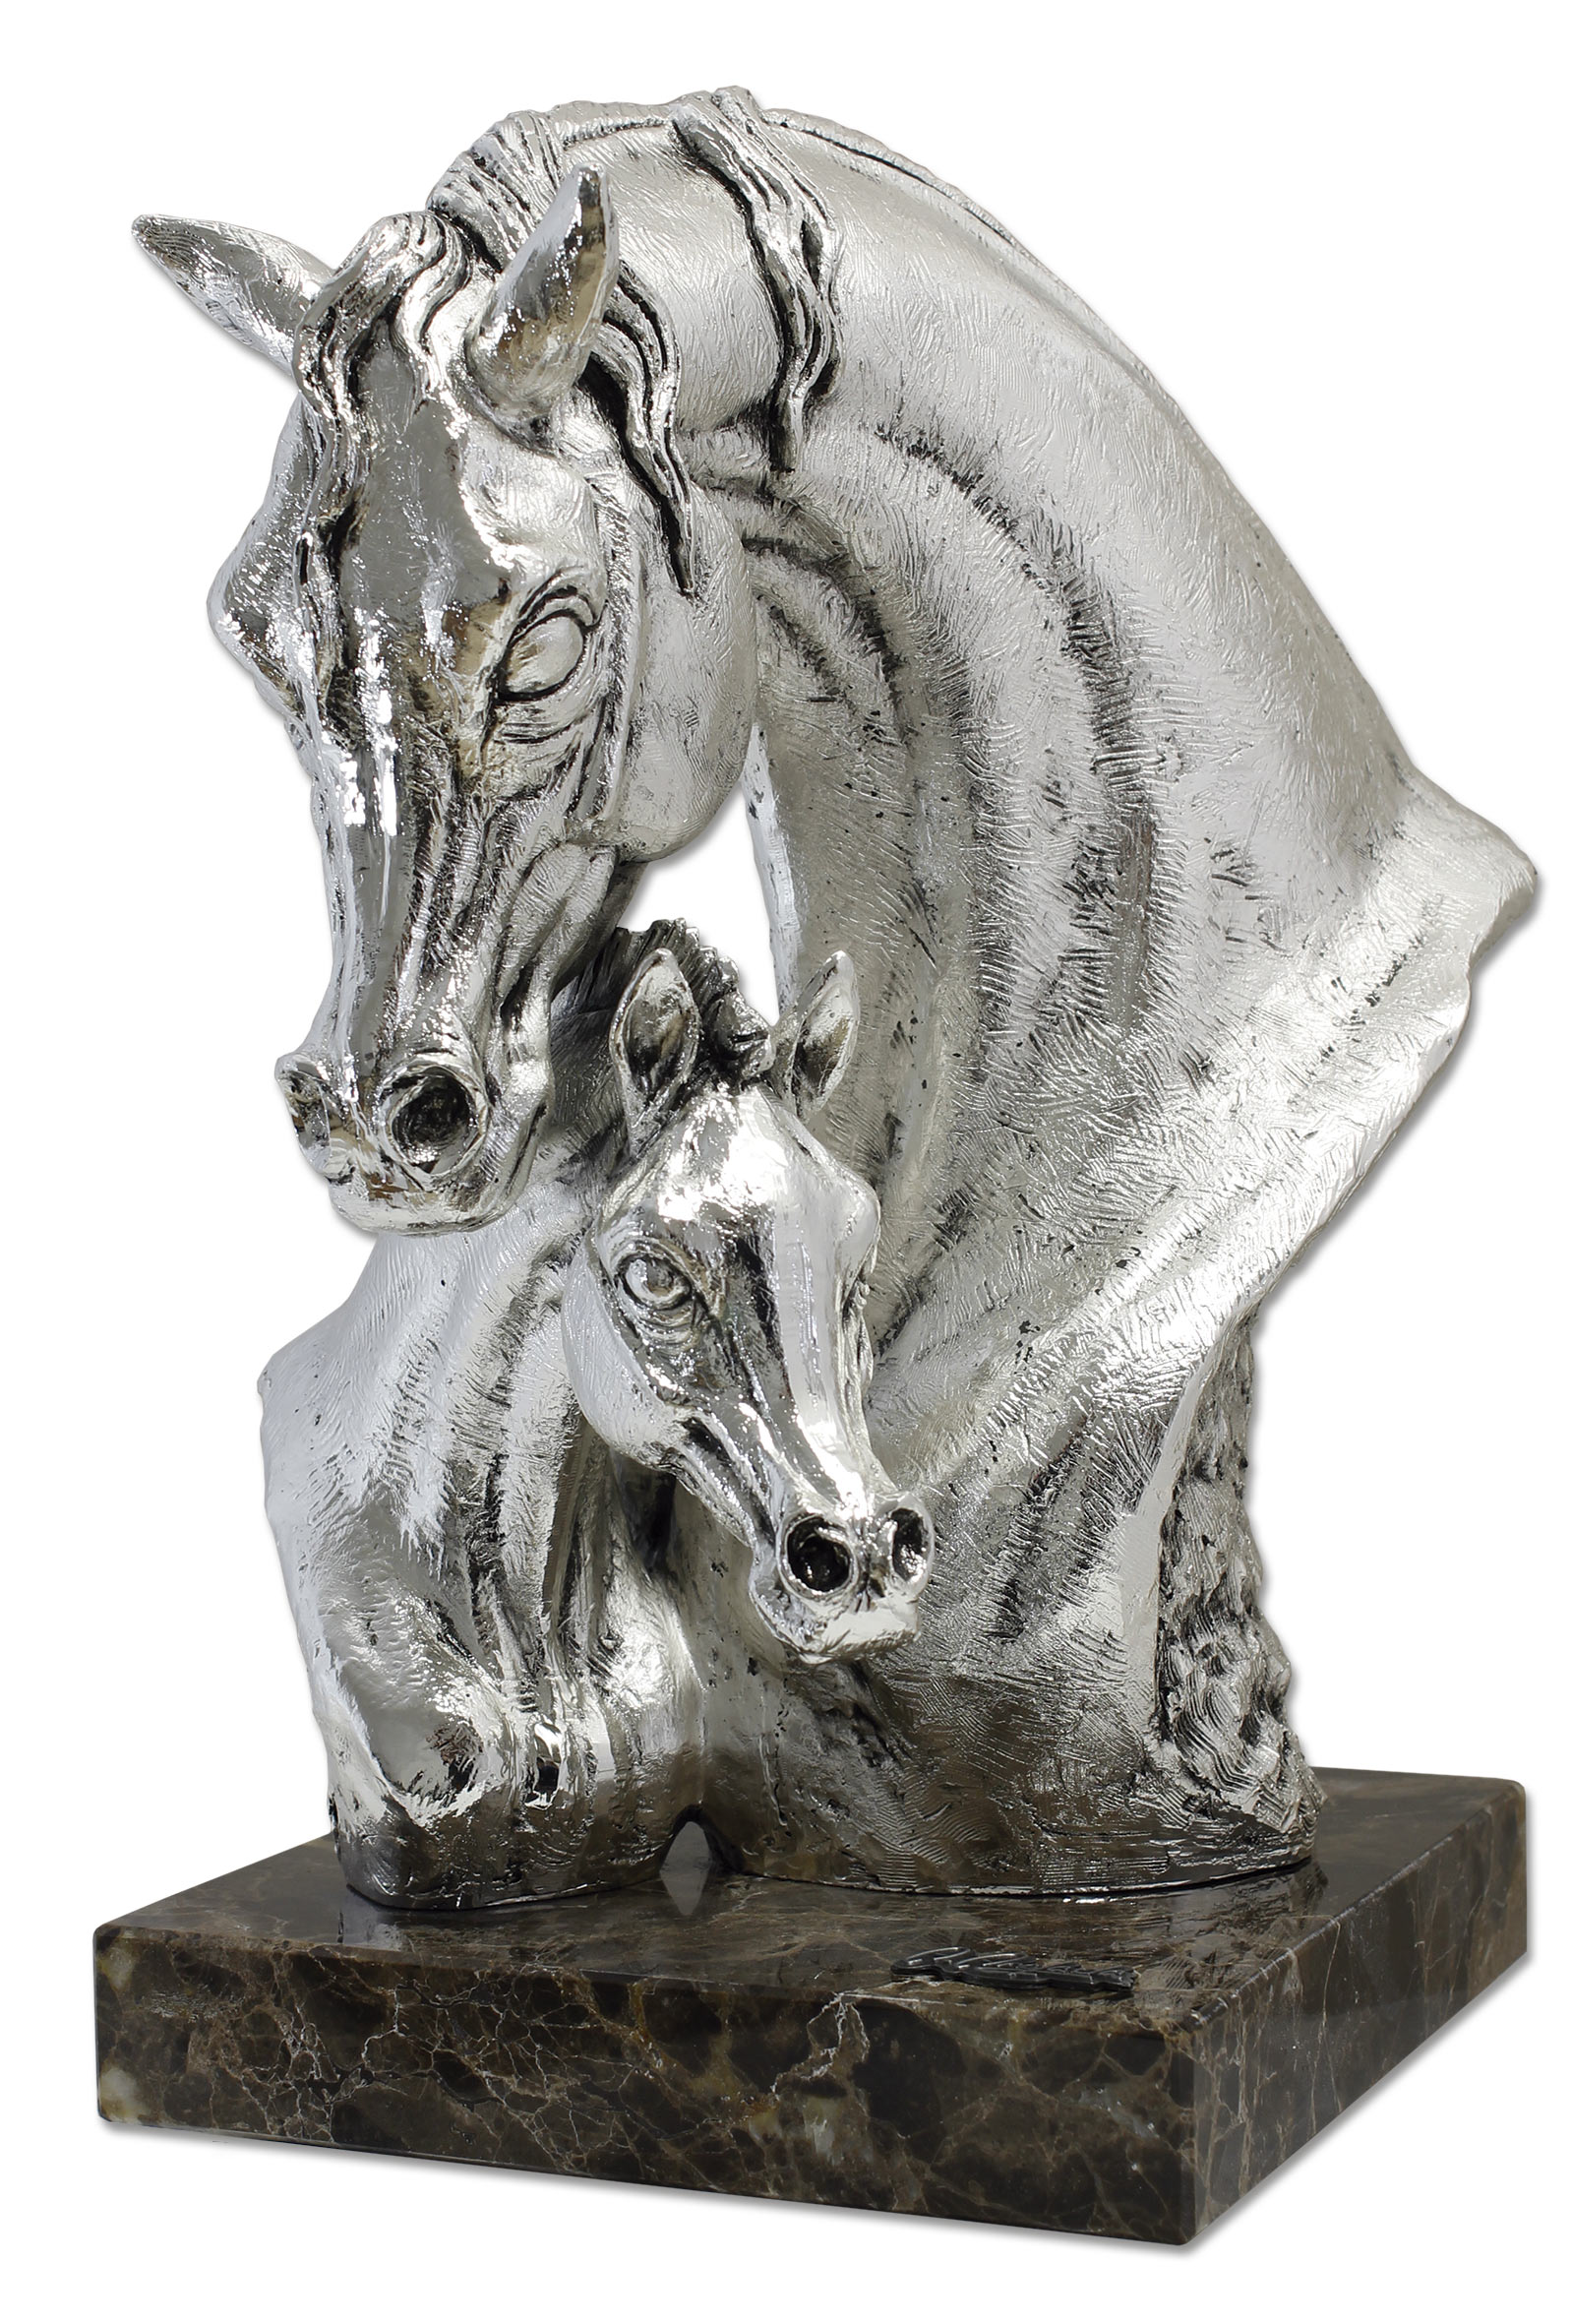 ref: 581P - SILVER MARE WITH FOAL BUST -  7 1/4 x 7 1/2 x 12